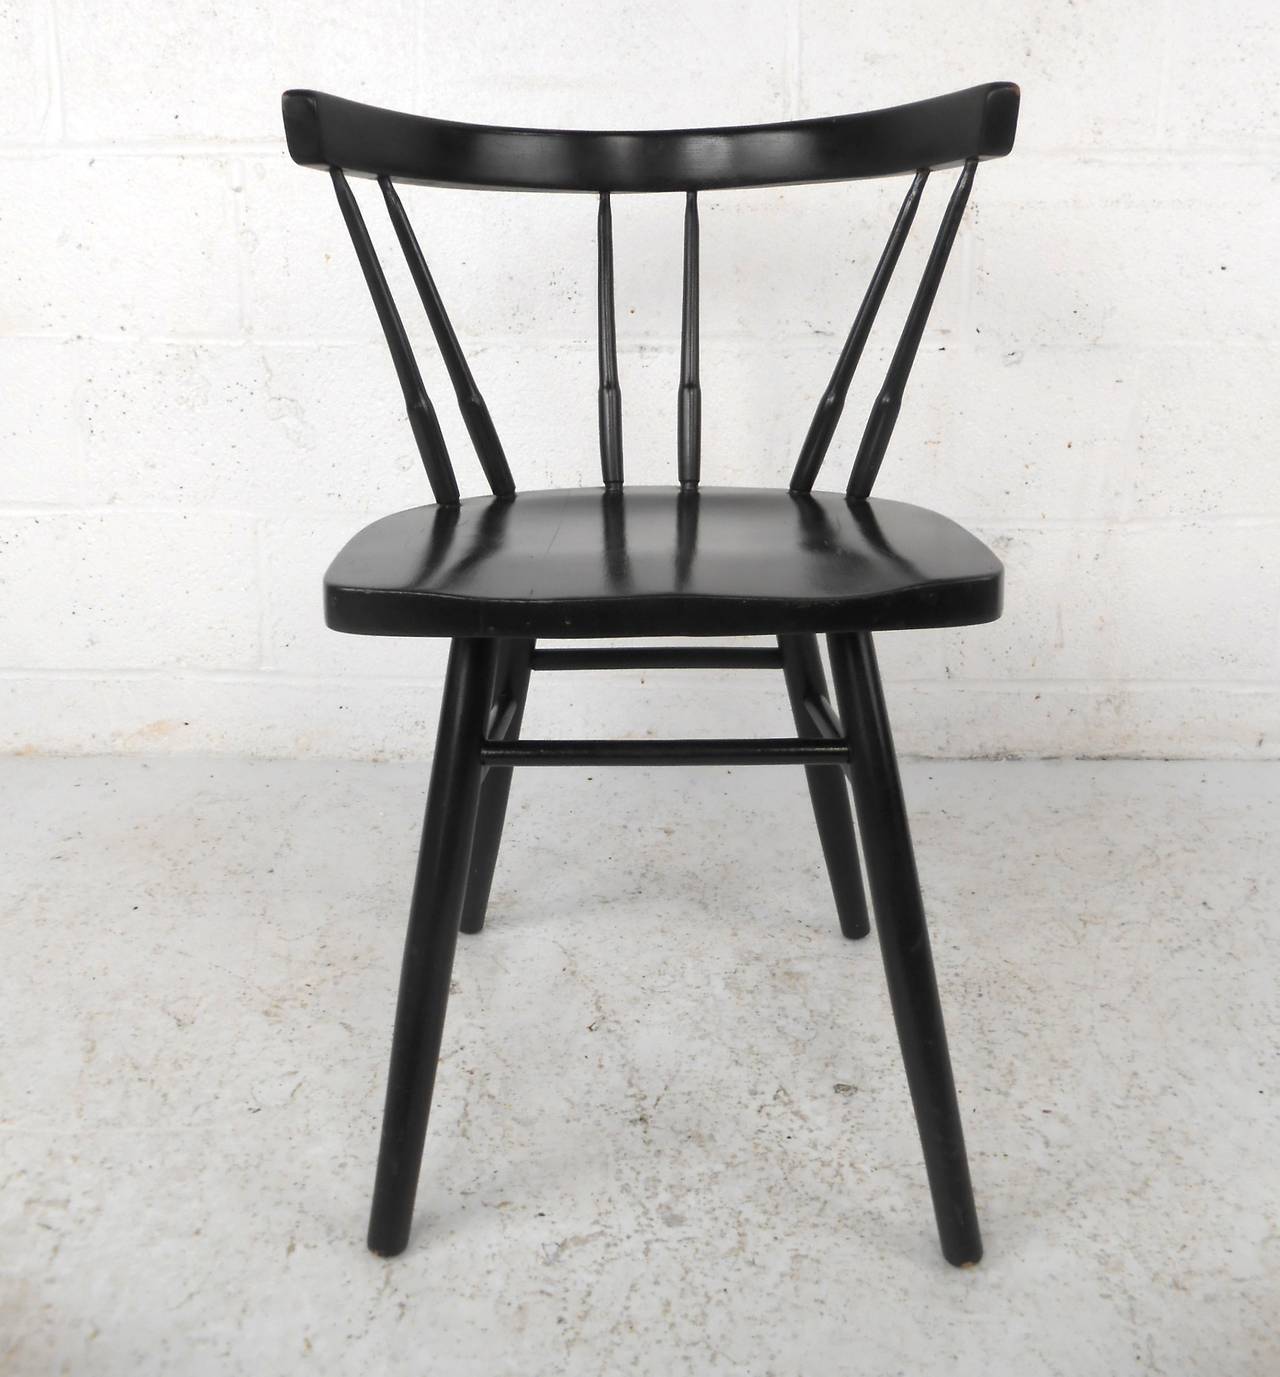 Made by Spainhour Furniture Co., in the style of Paul McCobb Planner Group.  This solid maple chair features a black lacquer finish, solid wood construction and tapered legs which offers a unique modern design to any home or office space.

Please